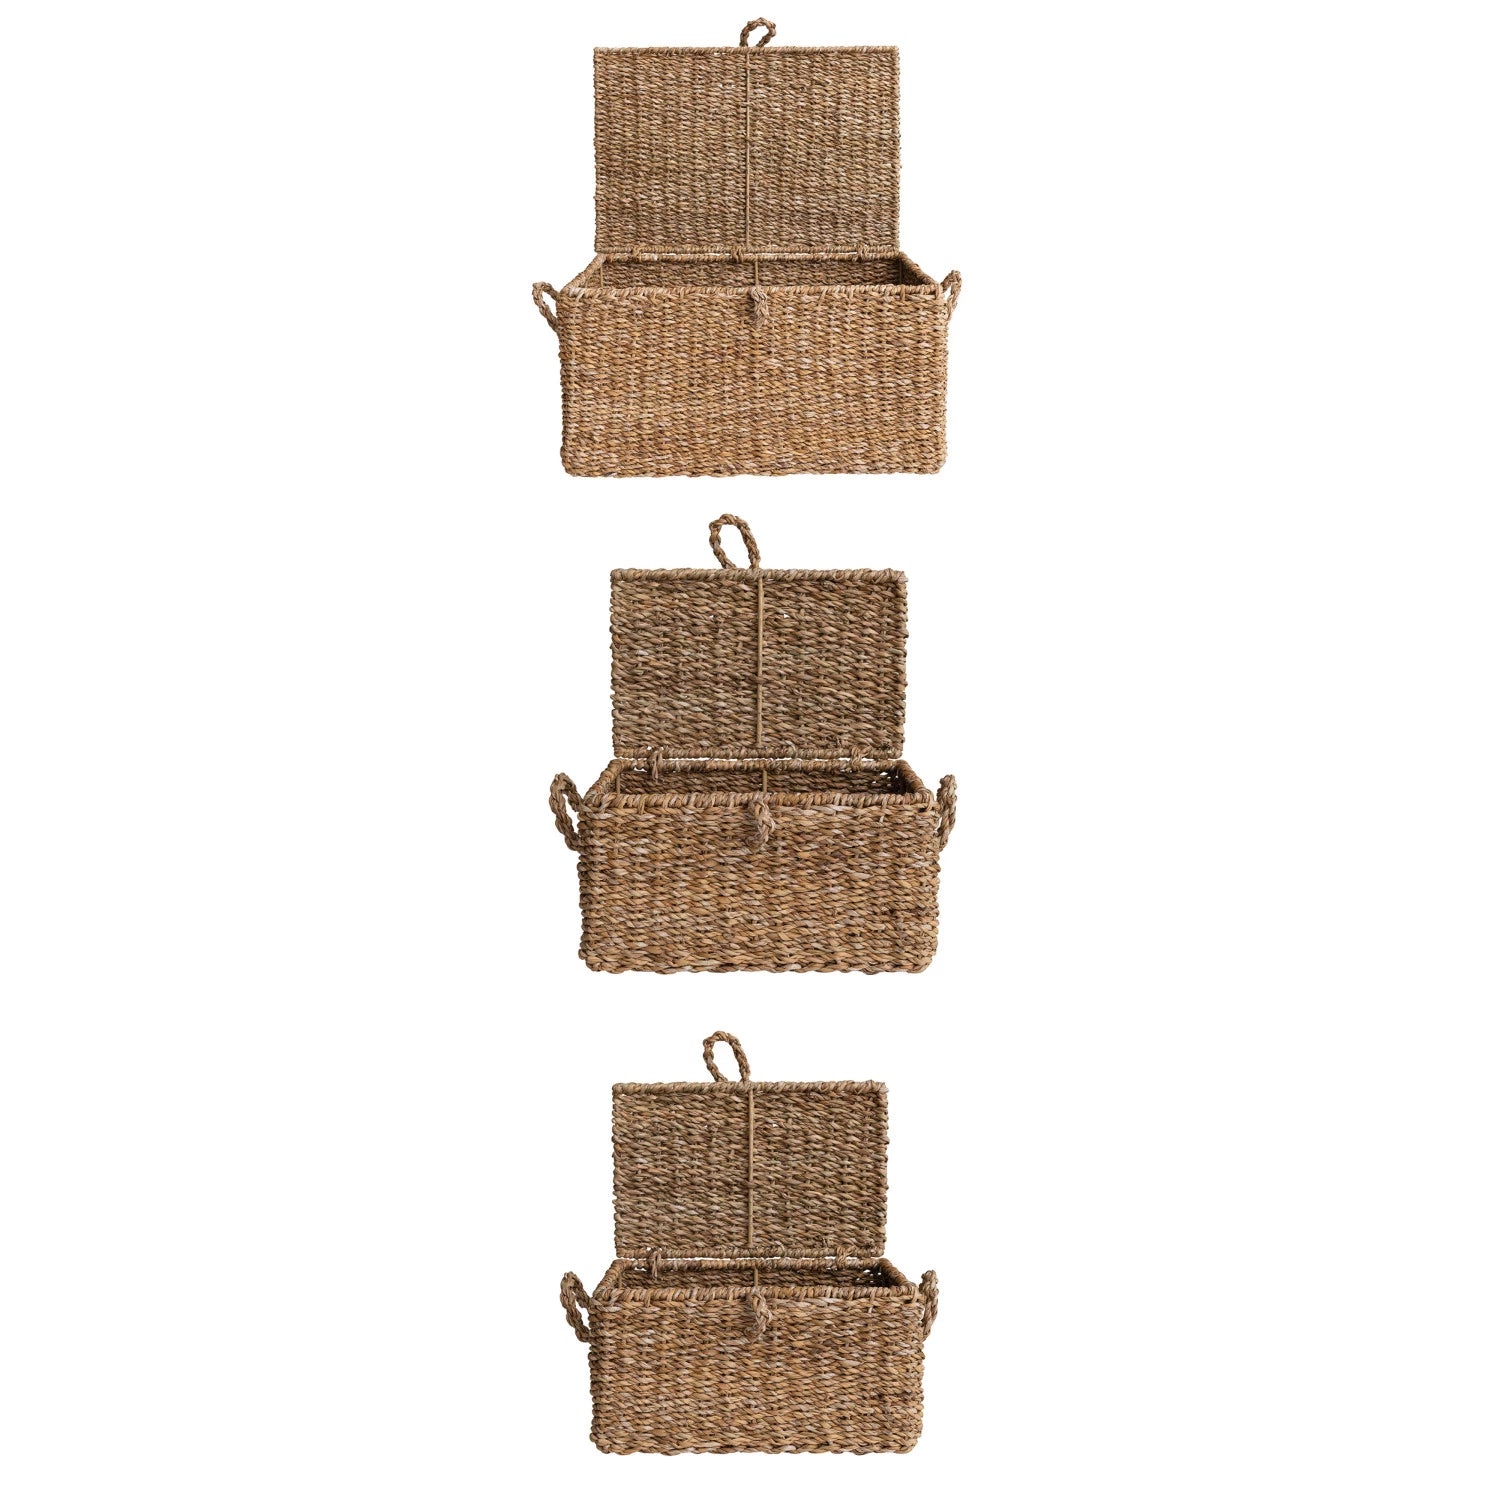 Woven Seagrass & Wire Framed Trunks, Set of 3